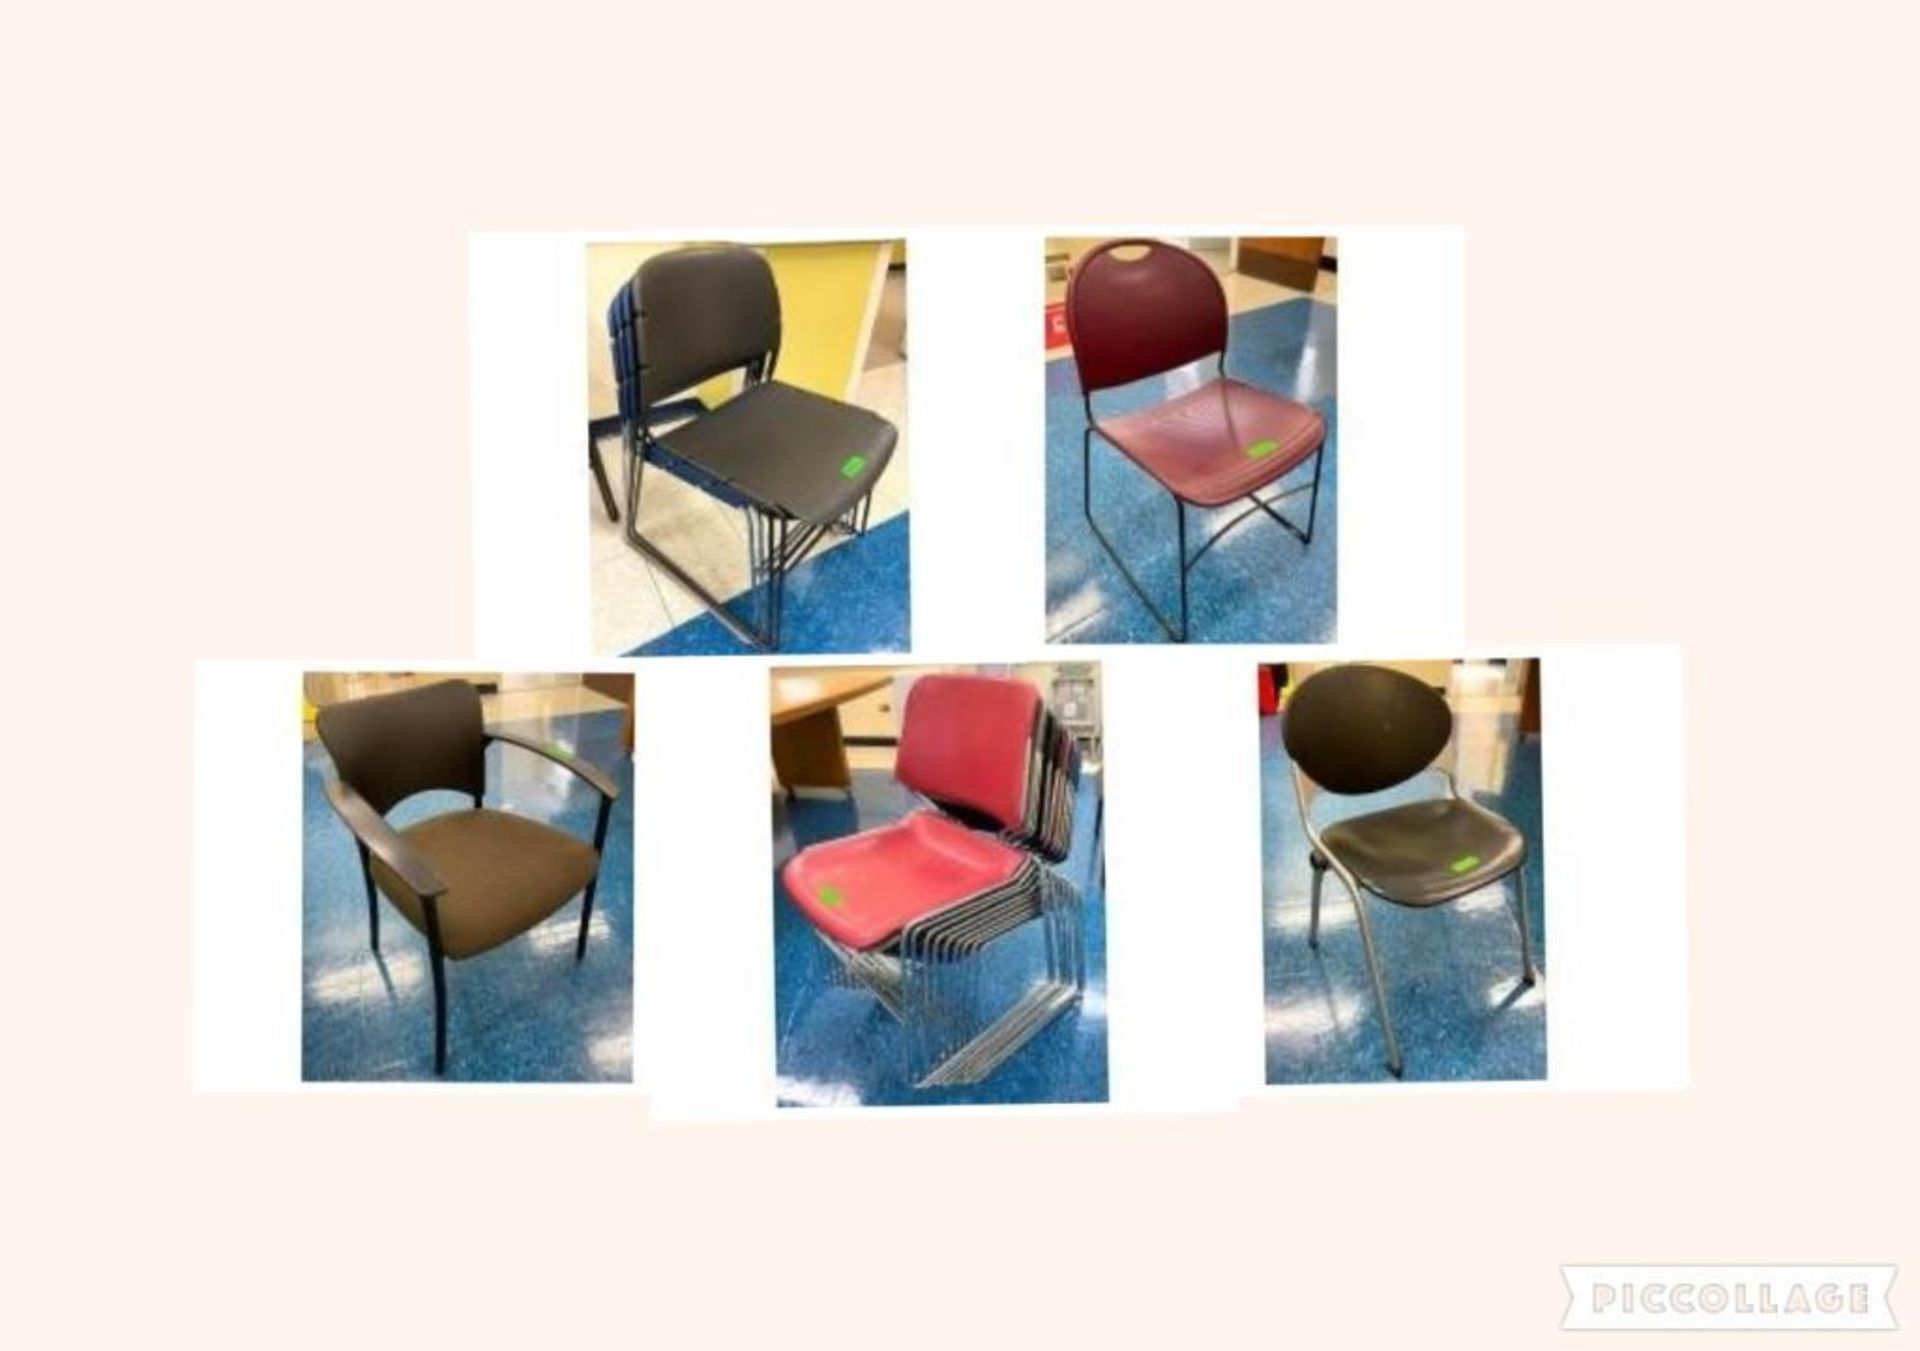 DESCRIPTION ASSORTED CHAIRS AS SHOWN ADDITIONAL INFORMATION (24) TOTAL CHAIRS LOCATION 5TH FLOOR: SN